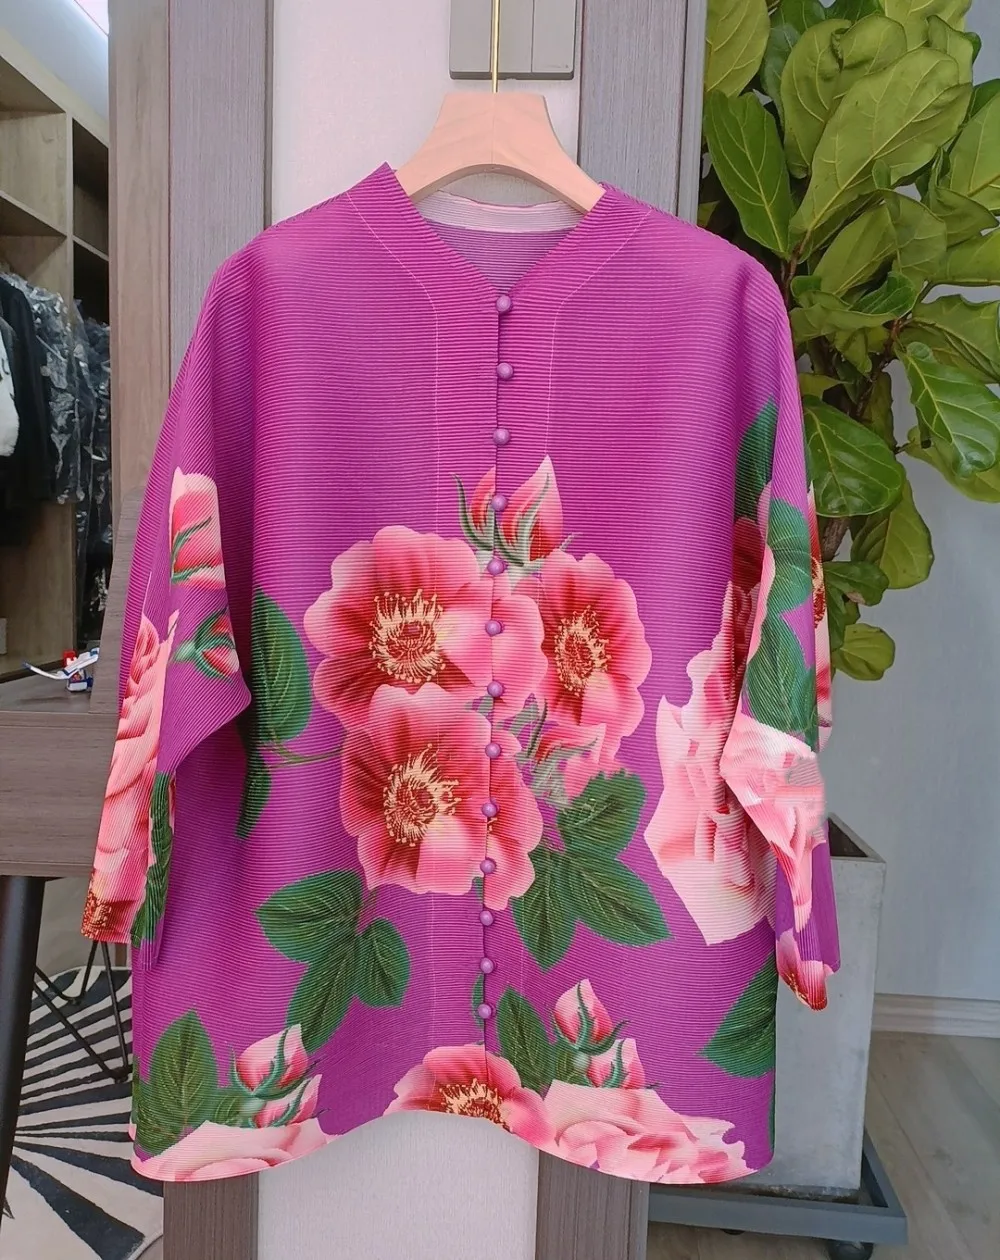 2023 Spring Chinese  Style Floral Print Women's Elegant O-neck Shirt Tops C578